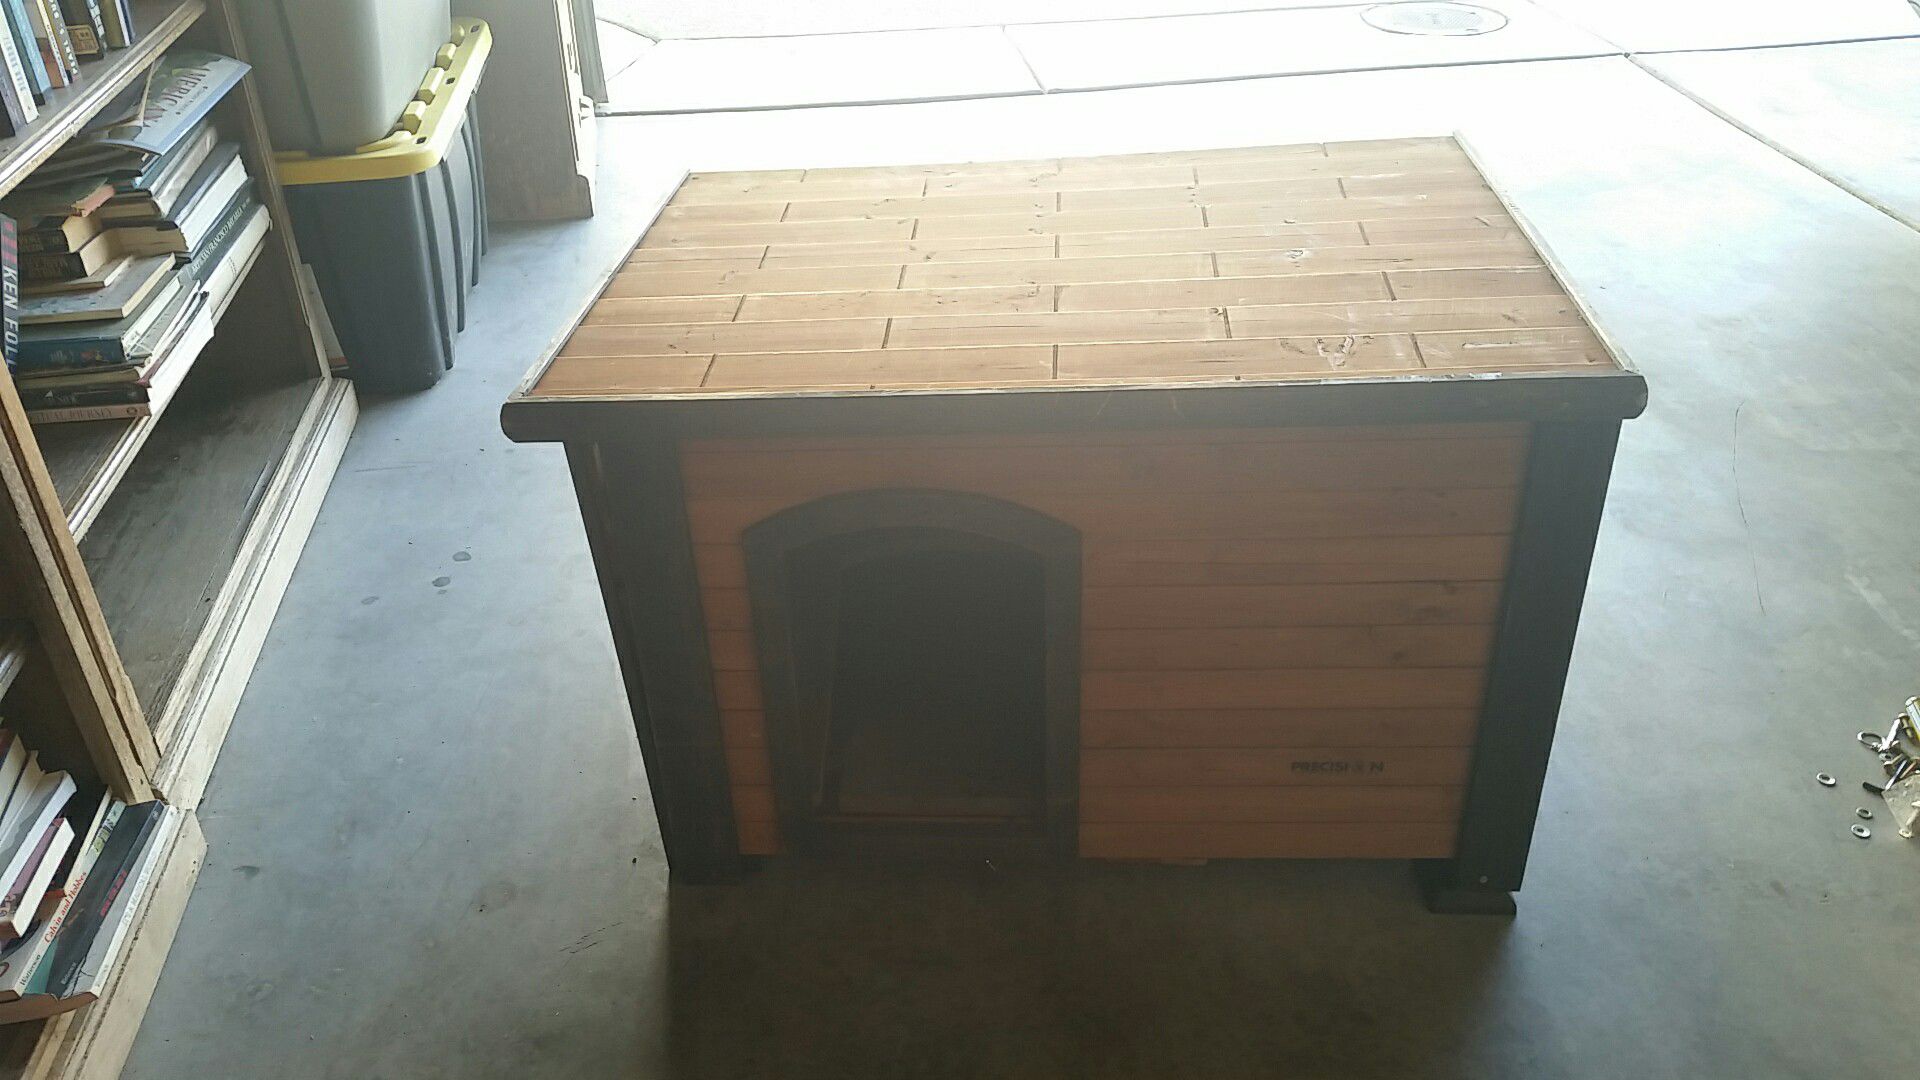 Precision wood insulated dog house 31x23